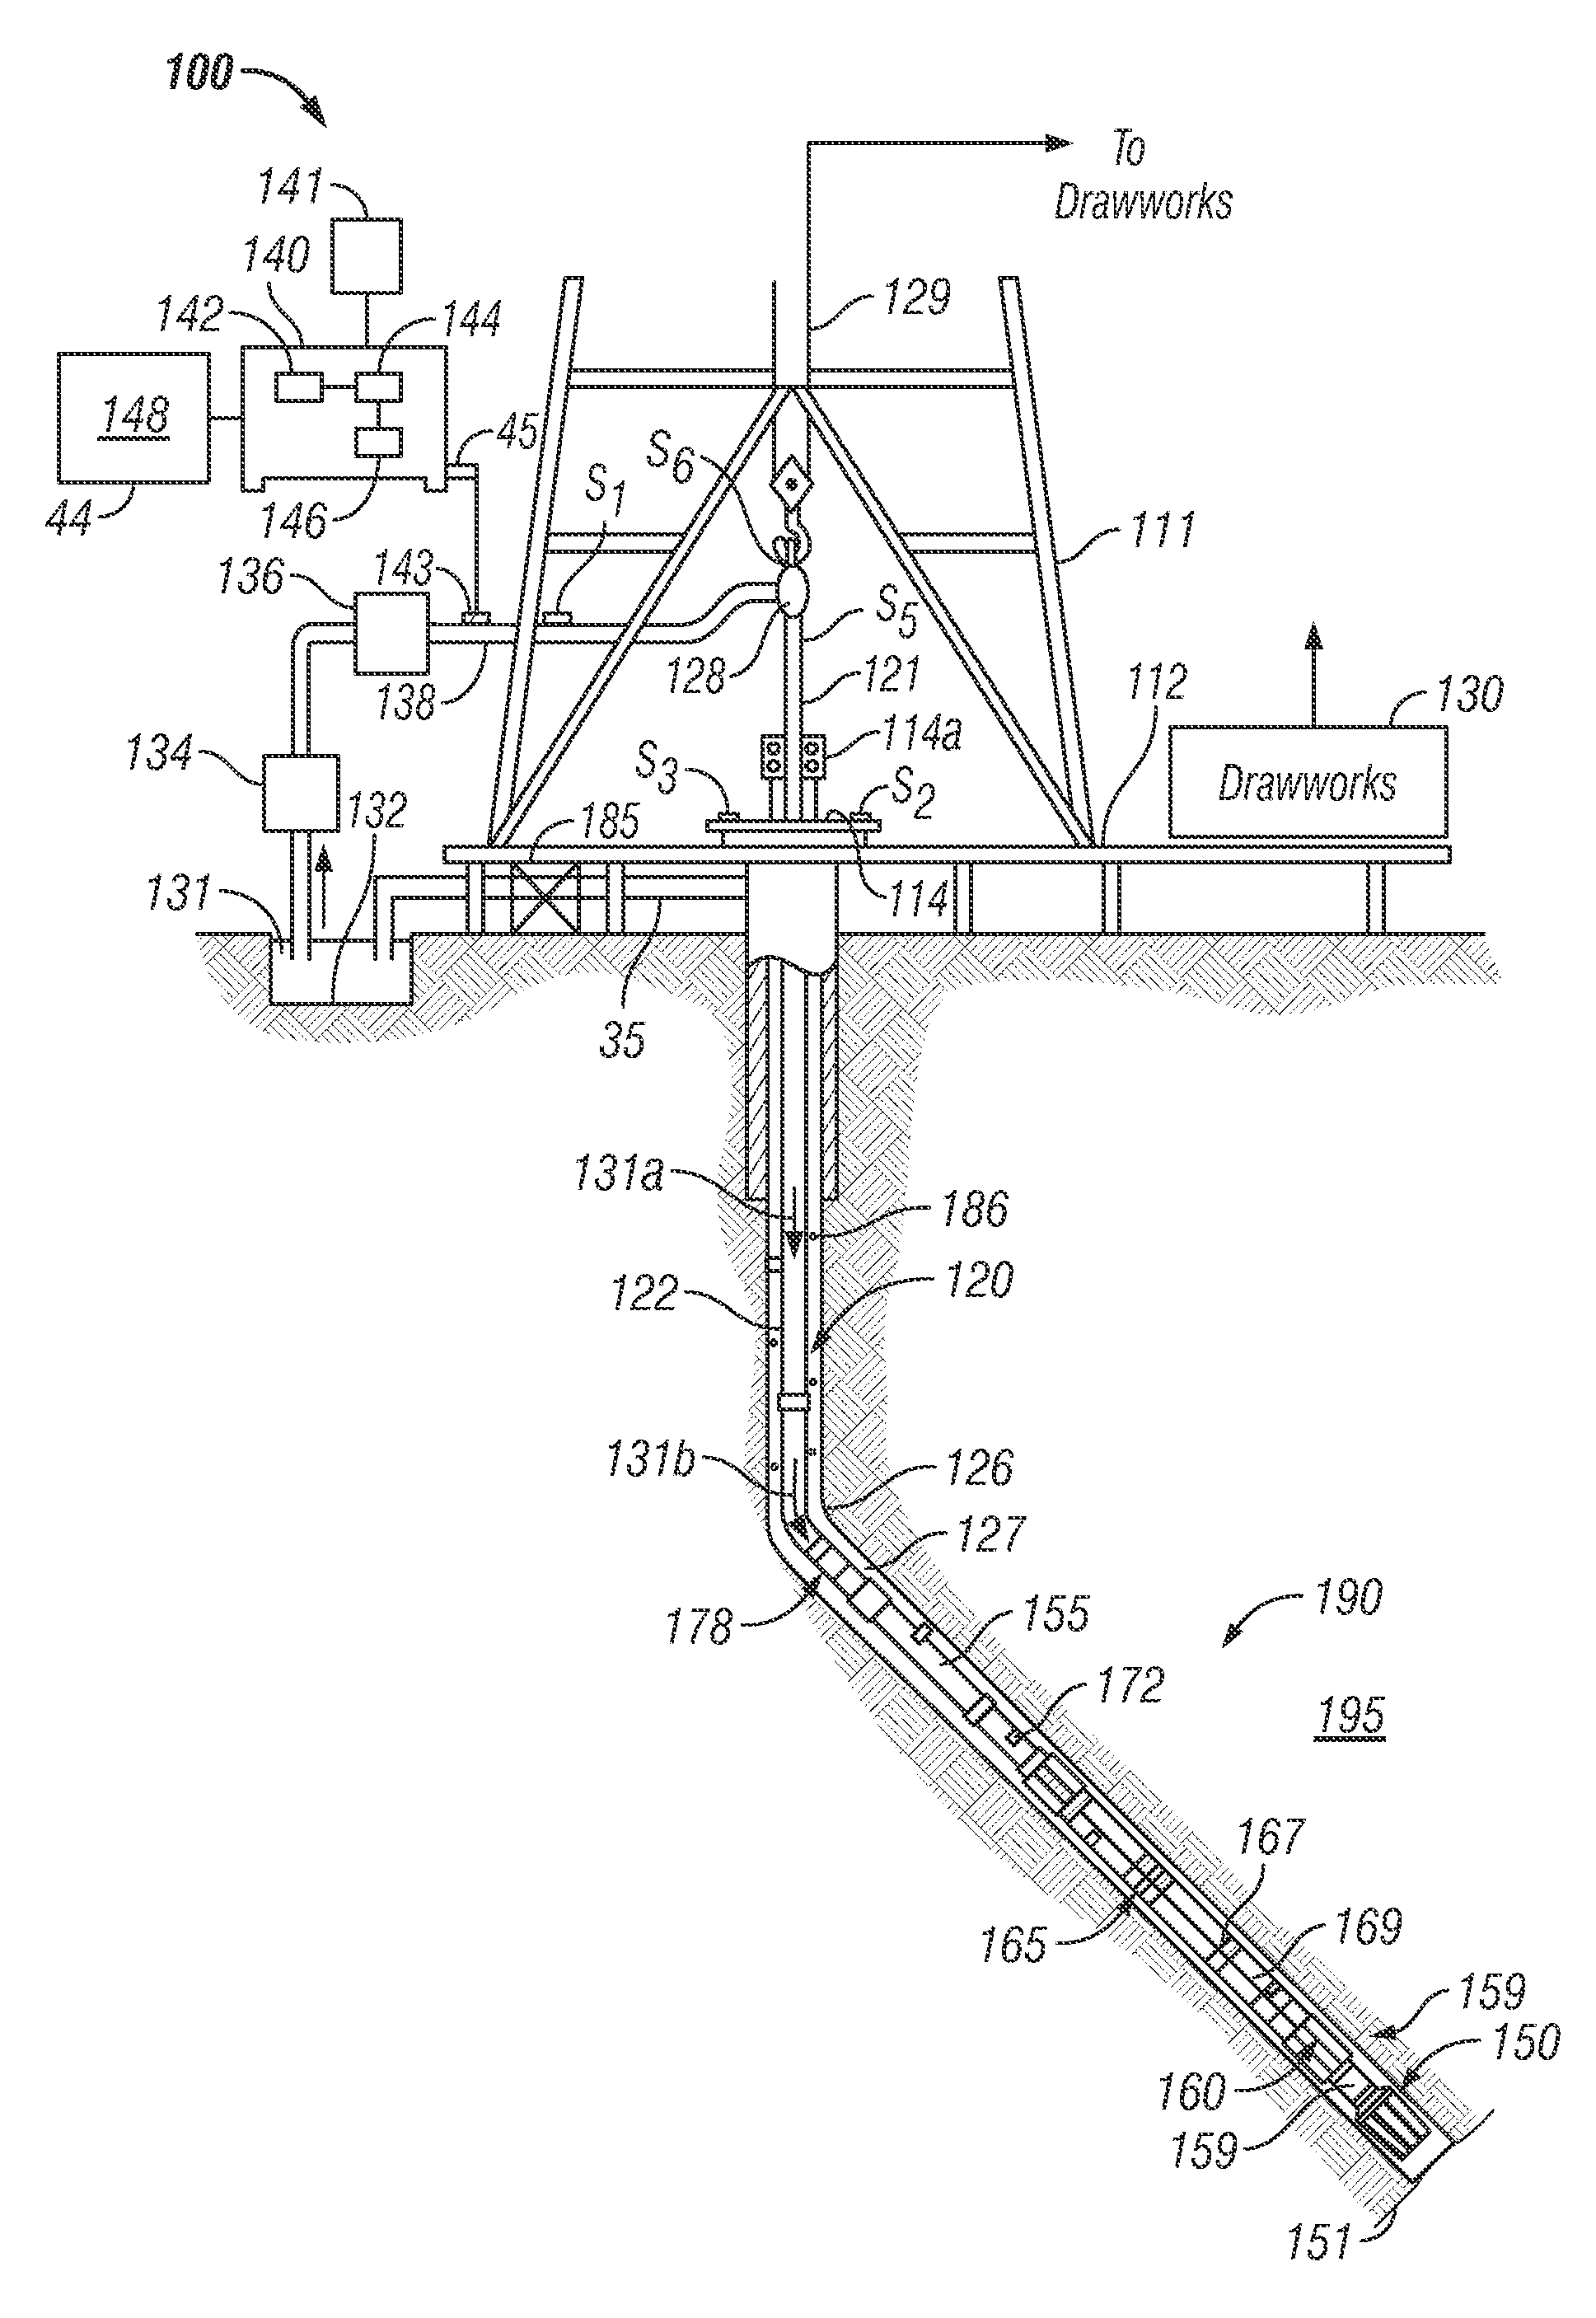 Desorption of a Desiccant By Radio Waves or Microwaves For a Downhole Sorption Cooler